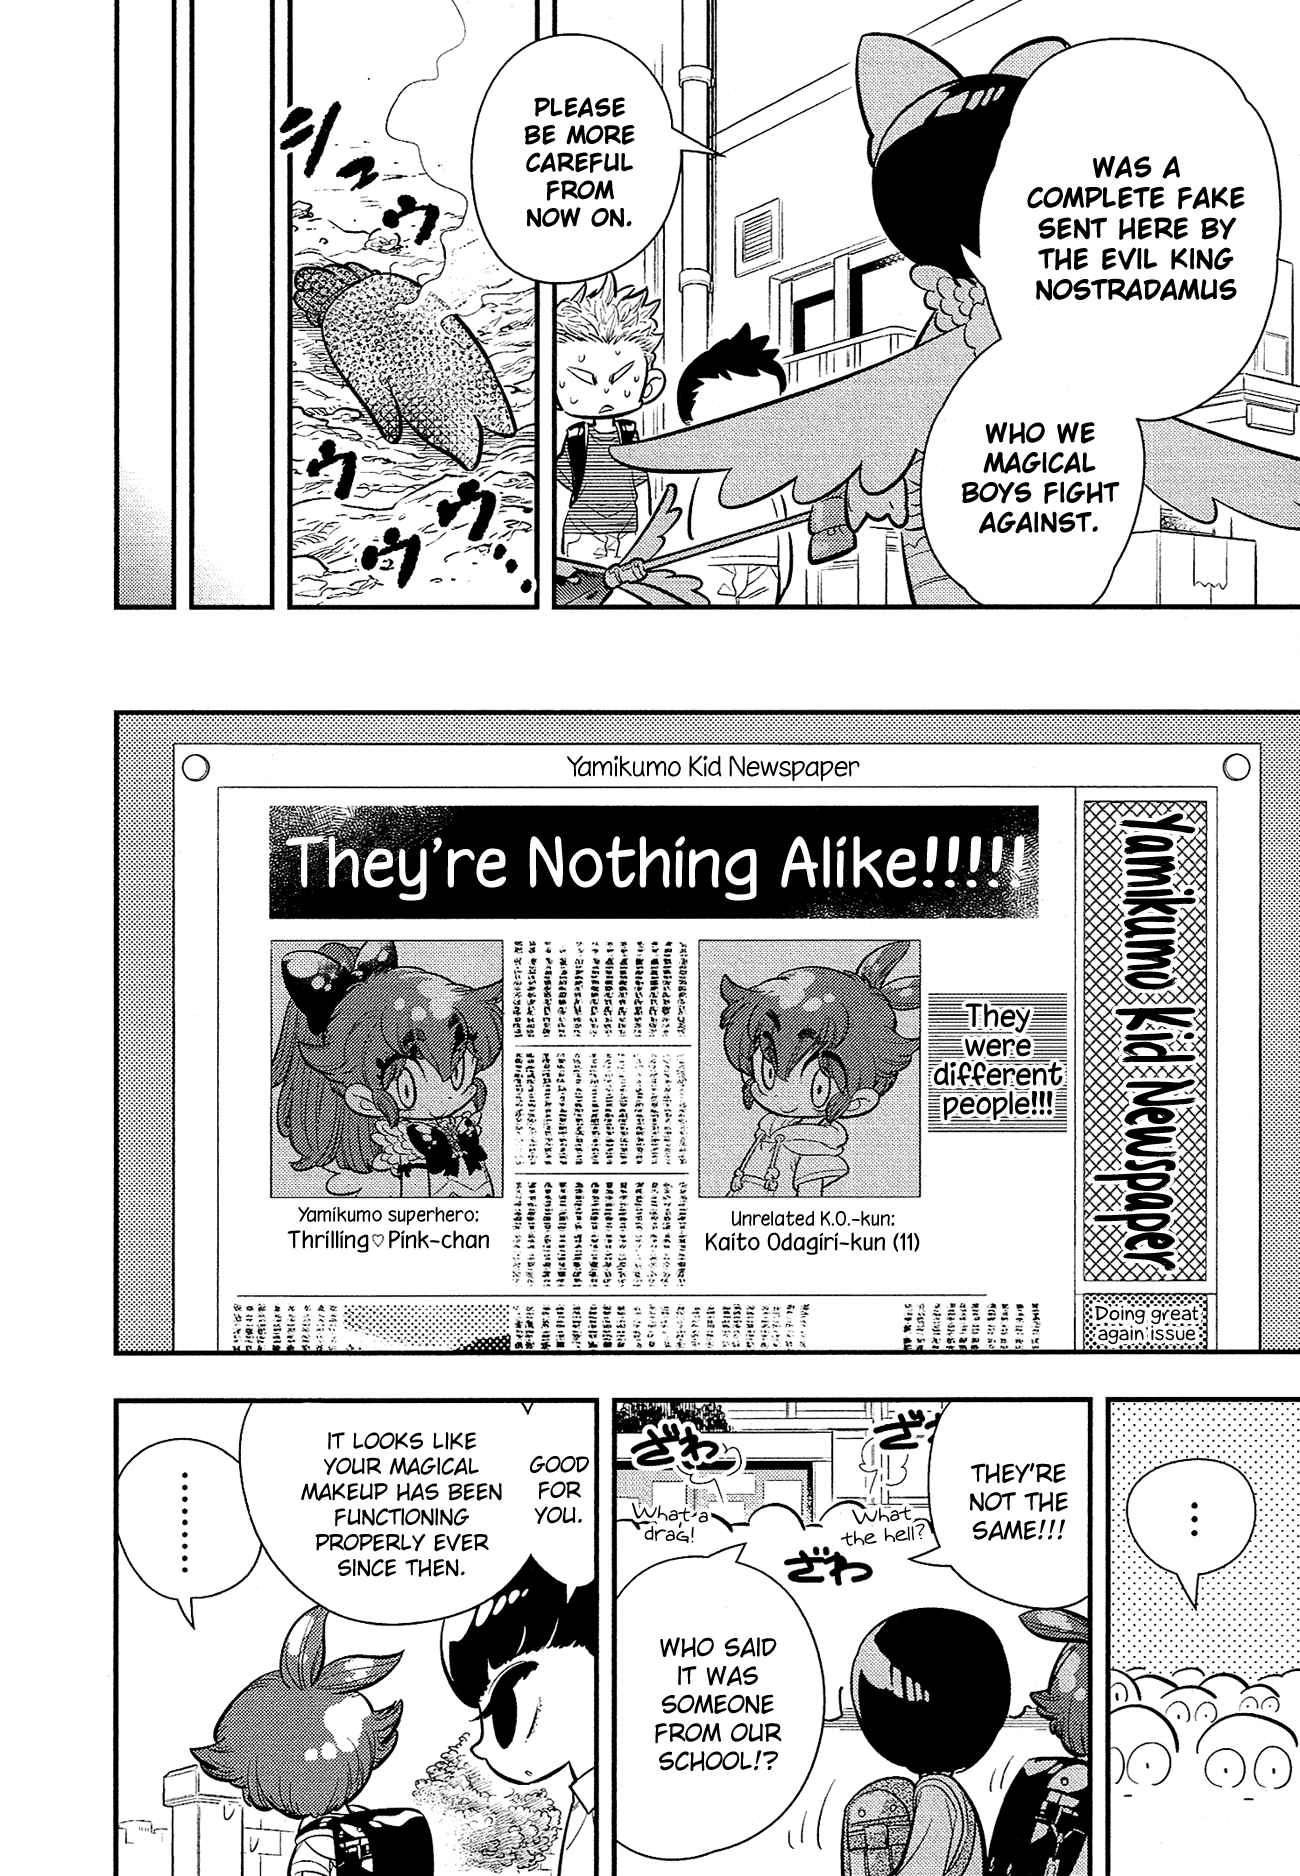 Bokura wa Mahou Shounen Vol. 2 Ch. 7 Is That How They're Gonna Find Out!?